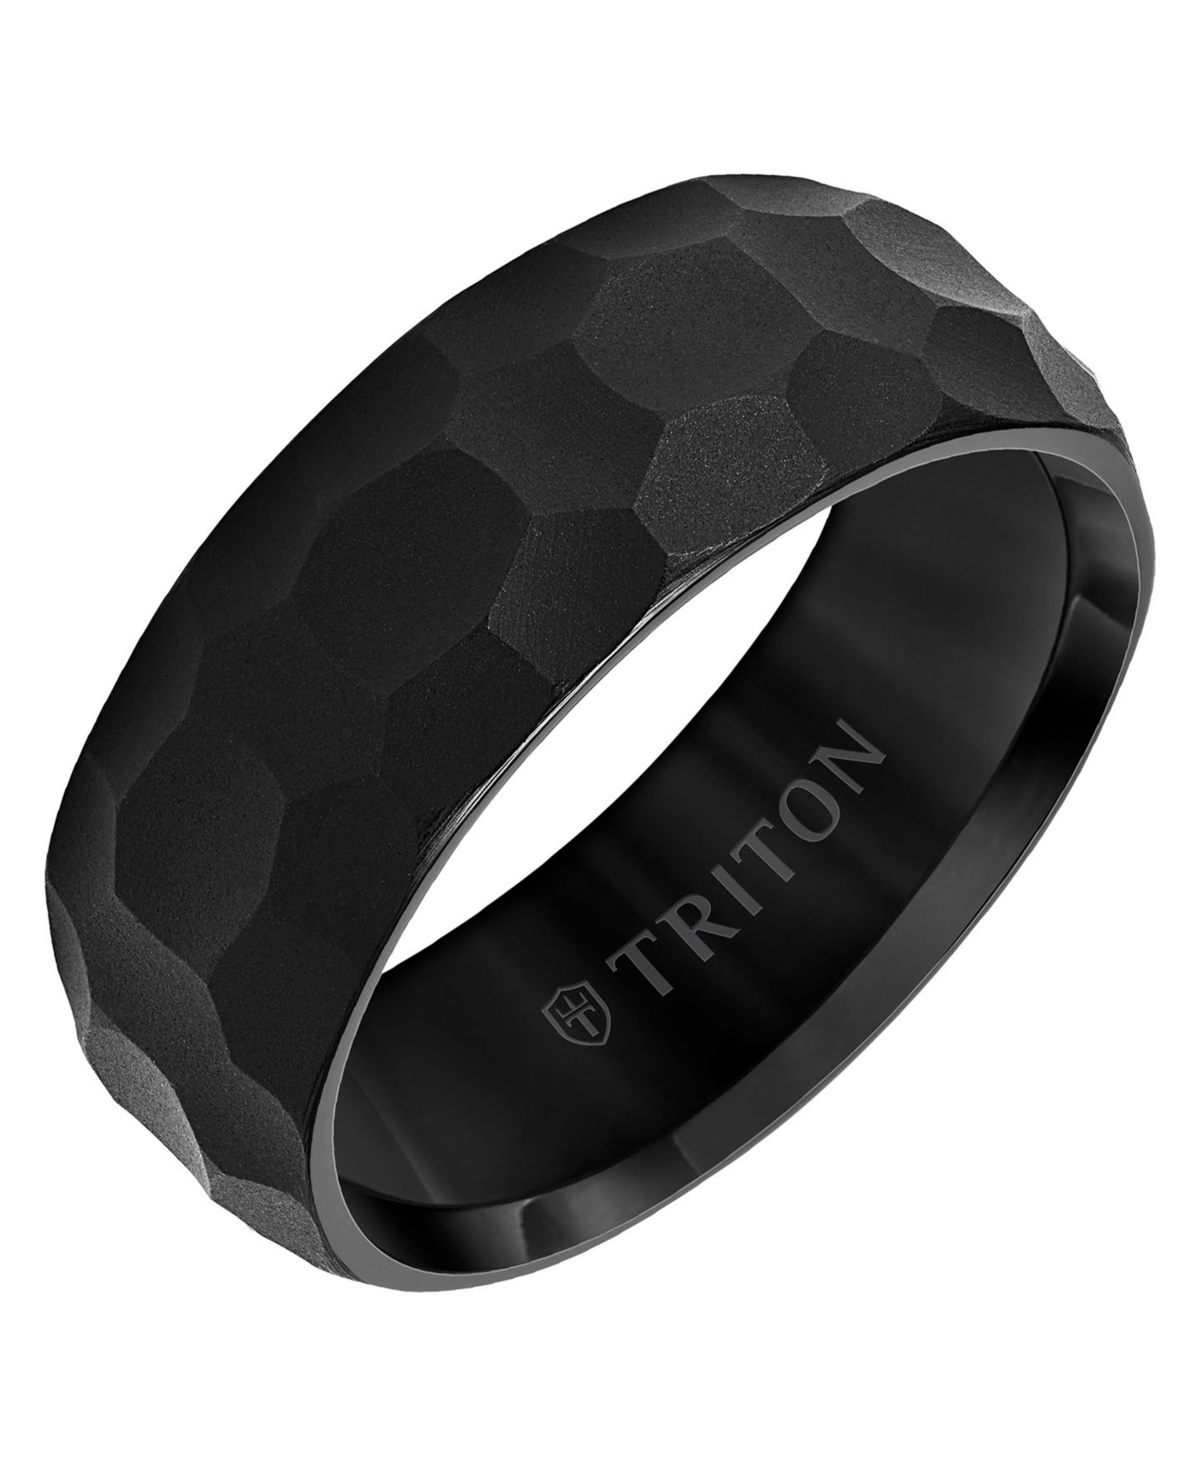 Triton Men's Stainless Steel Ring, Smooth Comfort Fit Wedding Band - Macy's